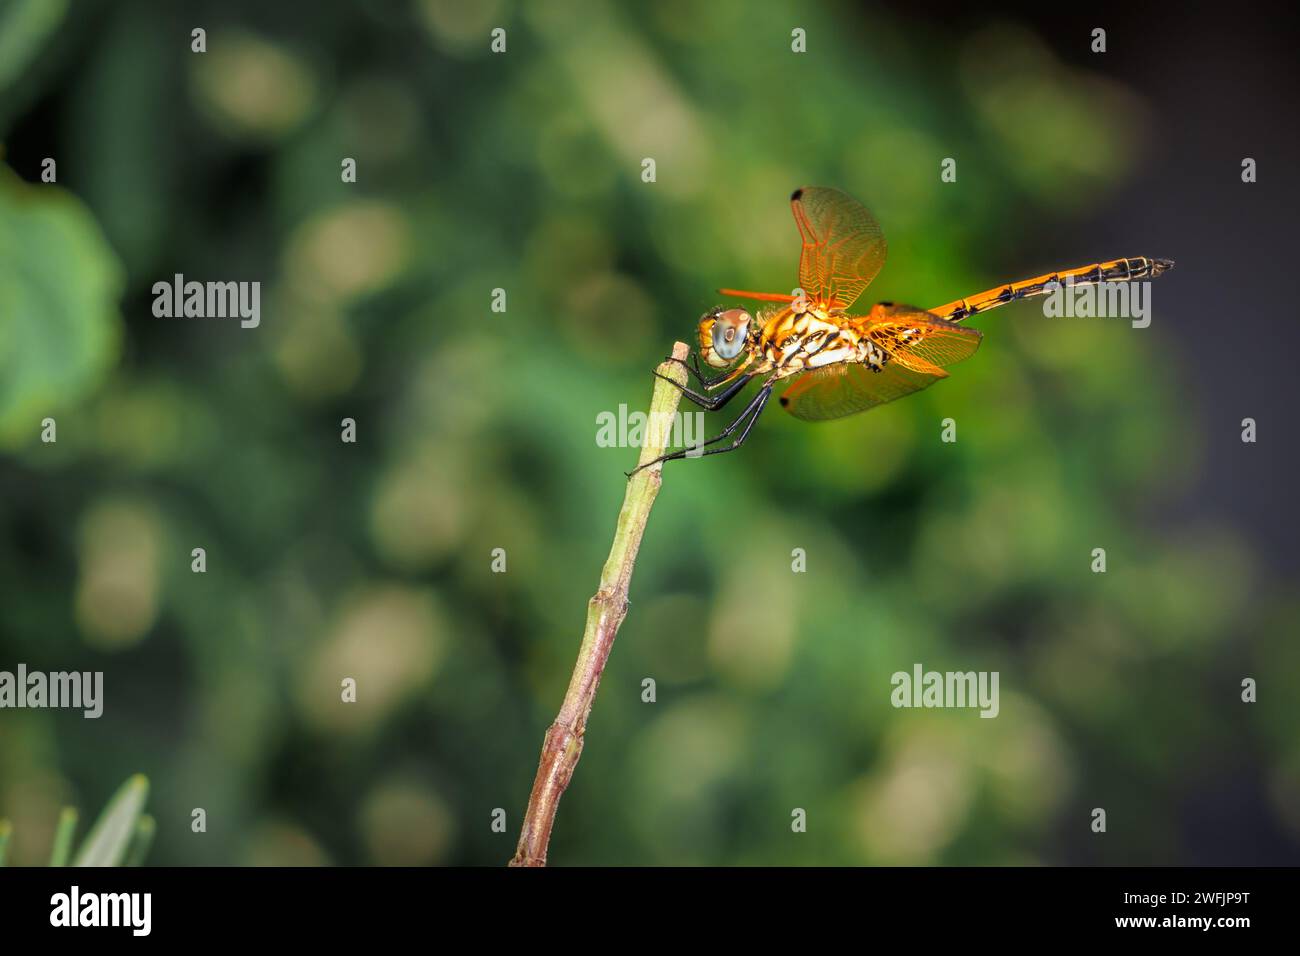 Orange Wandering glider Dragonfly (Pantala flavescens) sitting on green grass, South Africa Stock Photo